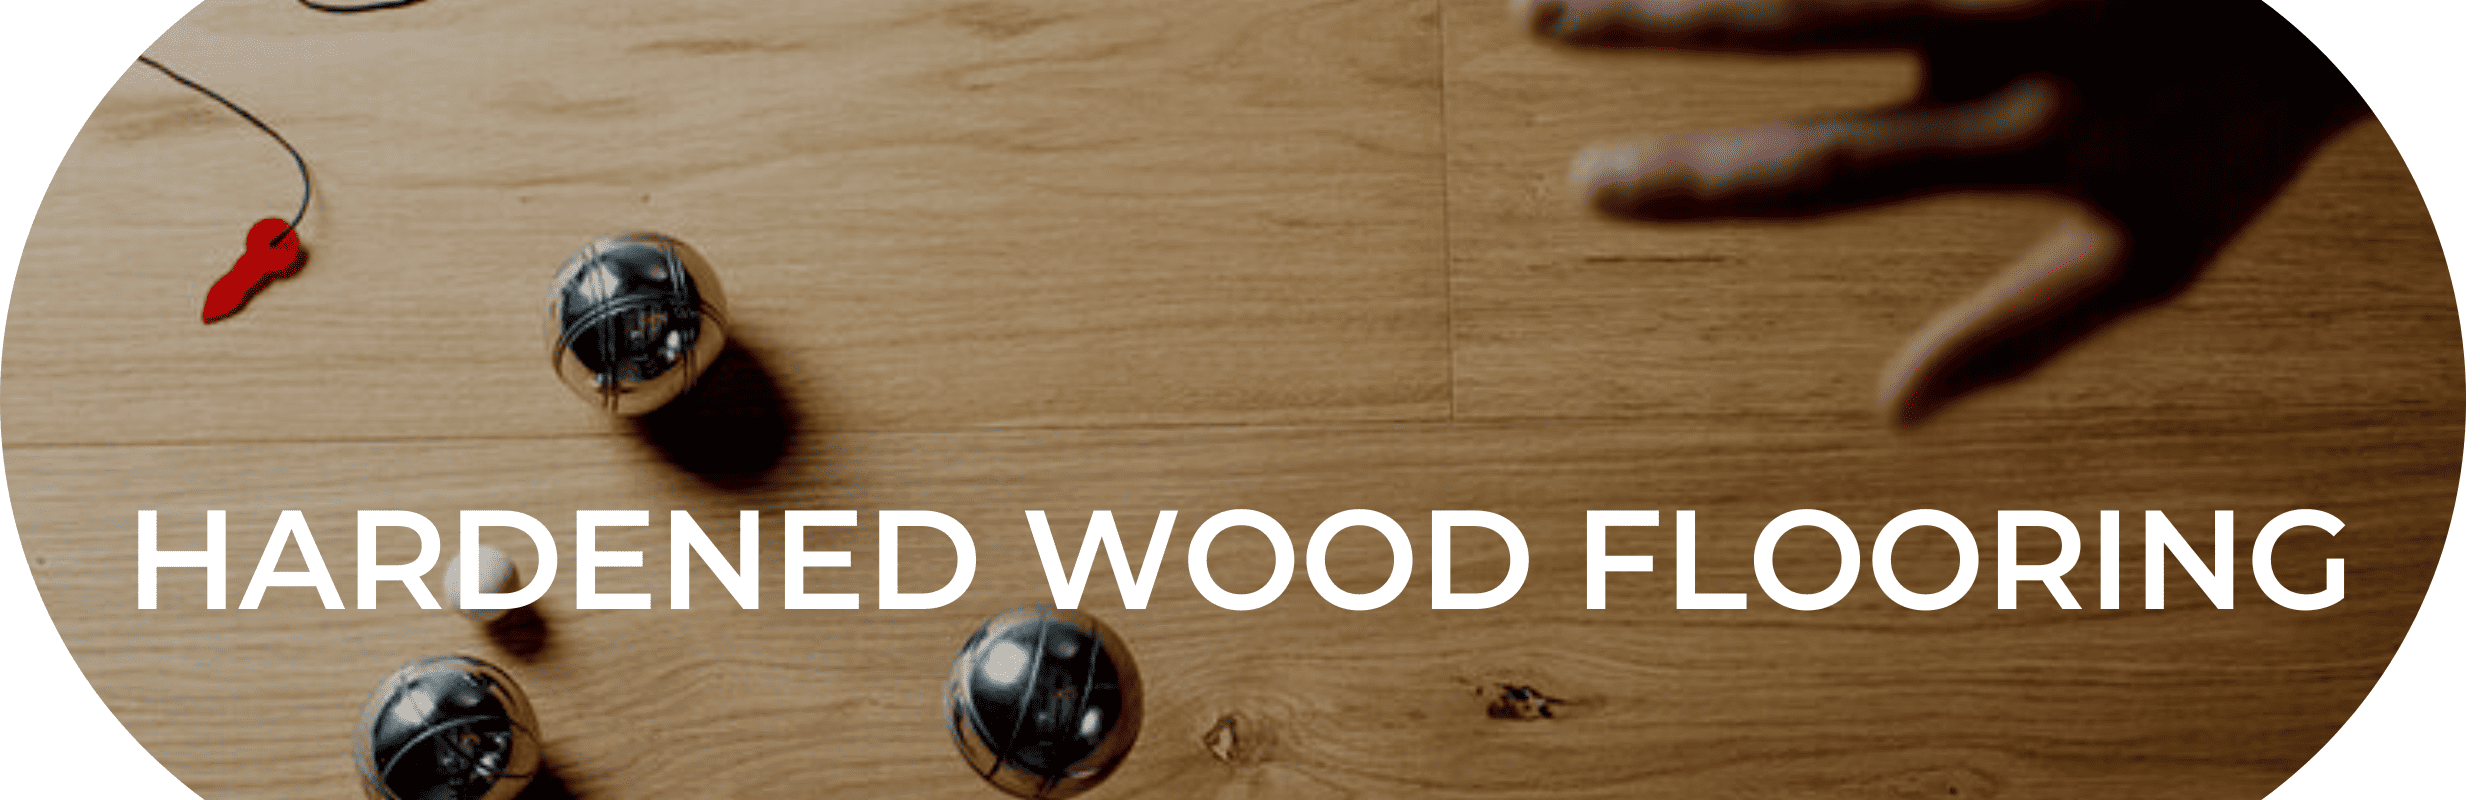 Valinge Hardened Wood Flooring (now known as BJELIN) - image of a child playing a game by throwing small but heavy metal toy balls onto a hardwood floor. The words 